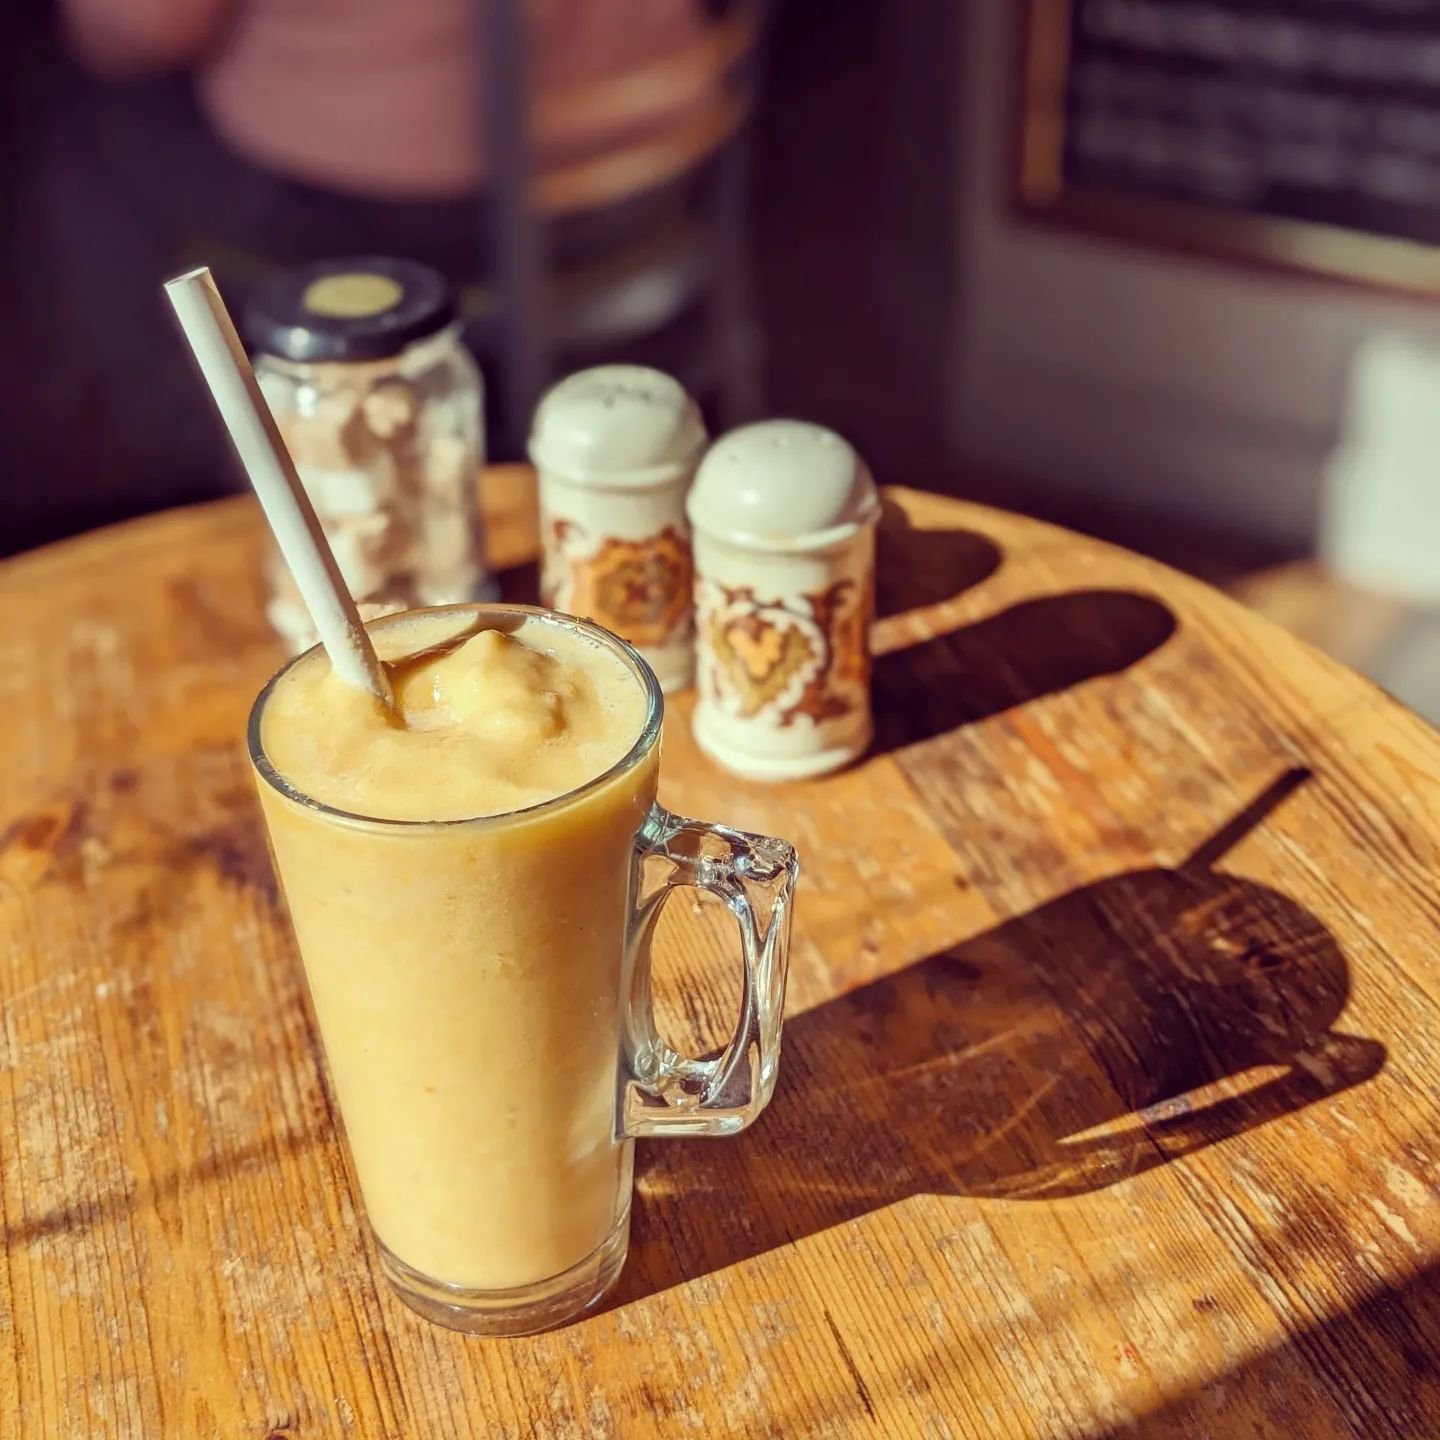 The sun is out! 

It might be chilly, but that isn't going to stop us enjoying the rays...

It must be time for some more refreshing thirst quenchers, rather than our cosy winter warmers, surely??

Our smoothies are available all year round, but they